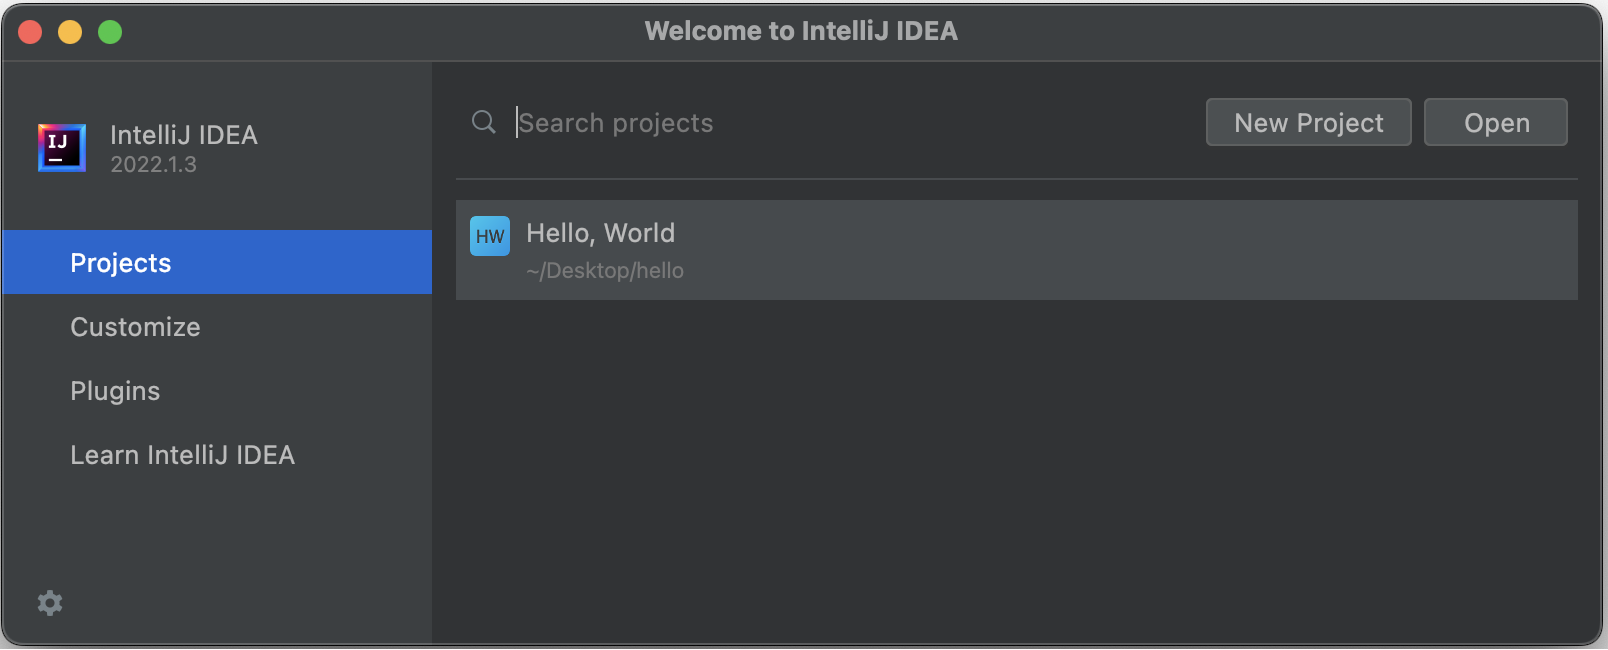 Opening an existing project in IntelliJ